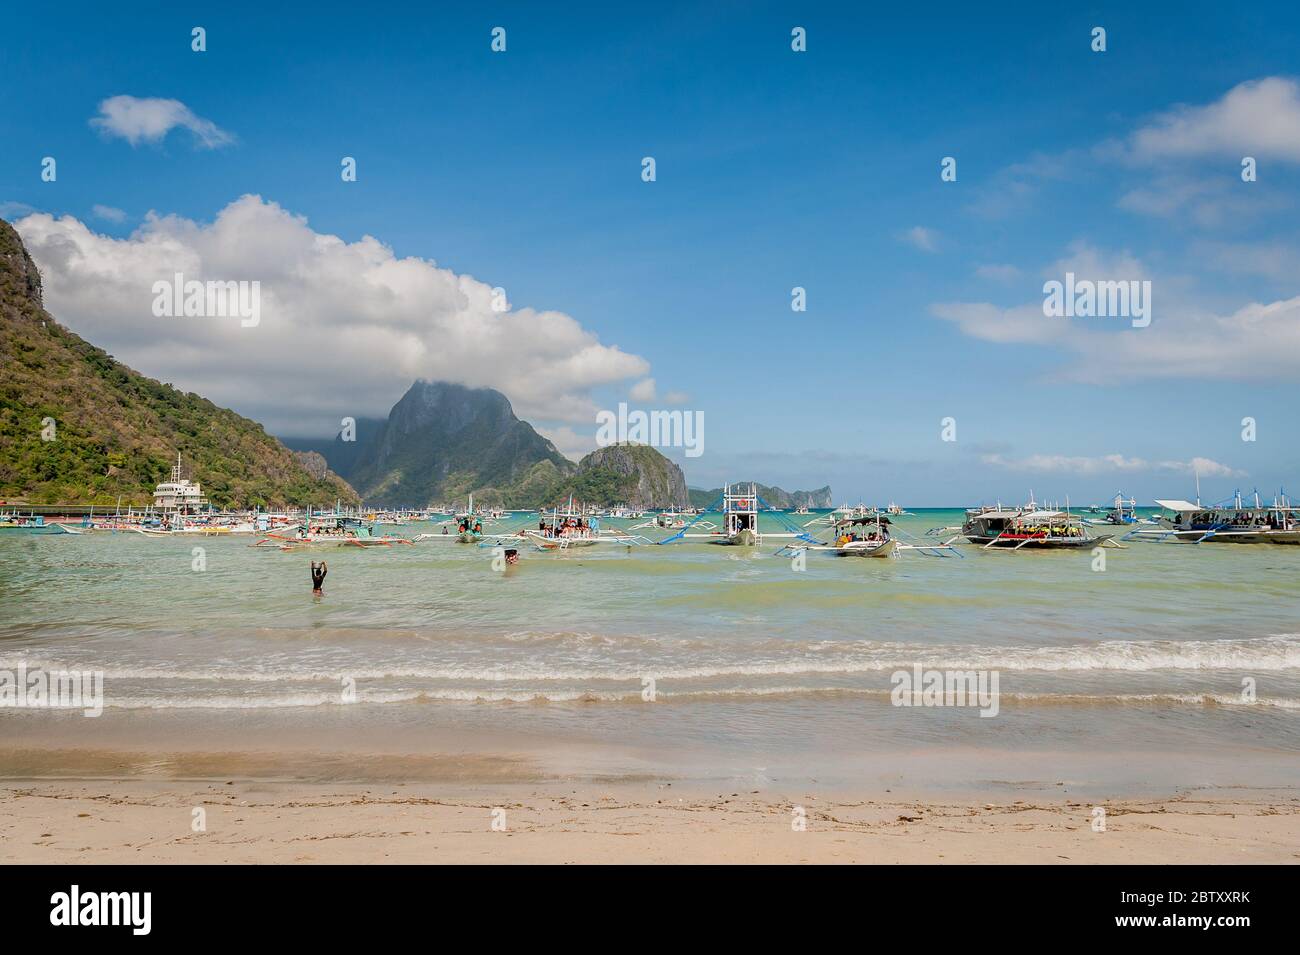 Morning scene at El Nido Beach, El Nido, Palawan, Philippines as the day boats prepare to take tourists out to the islands and beaches. Stock Photo